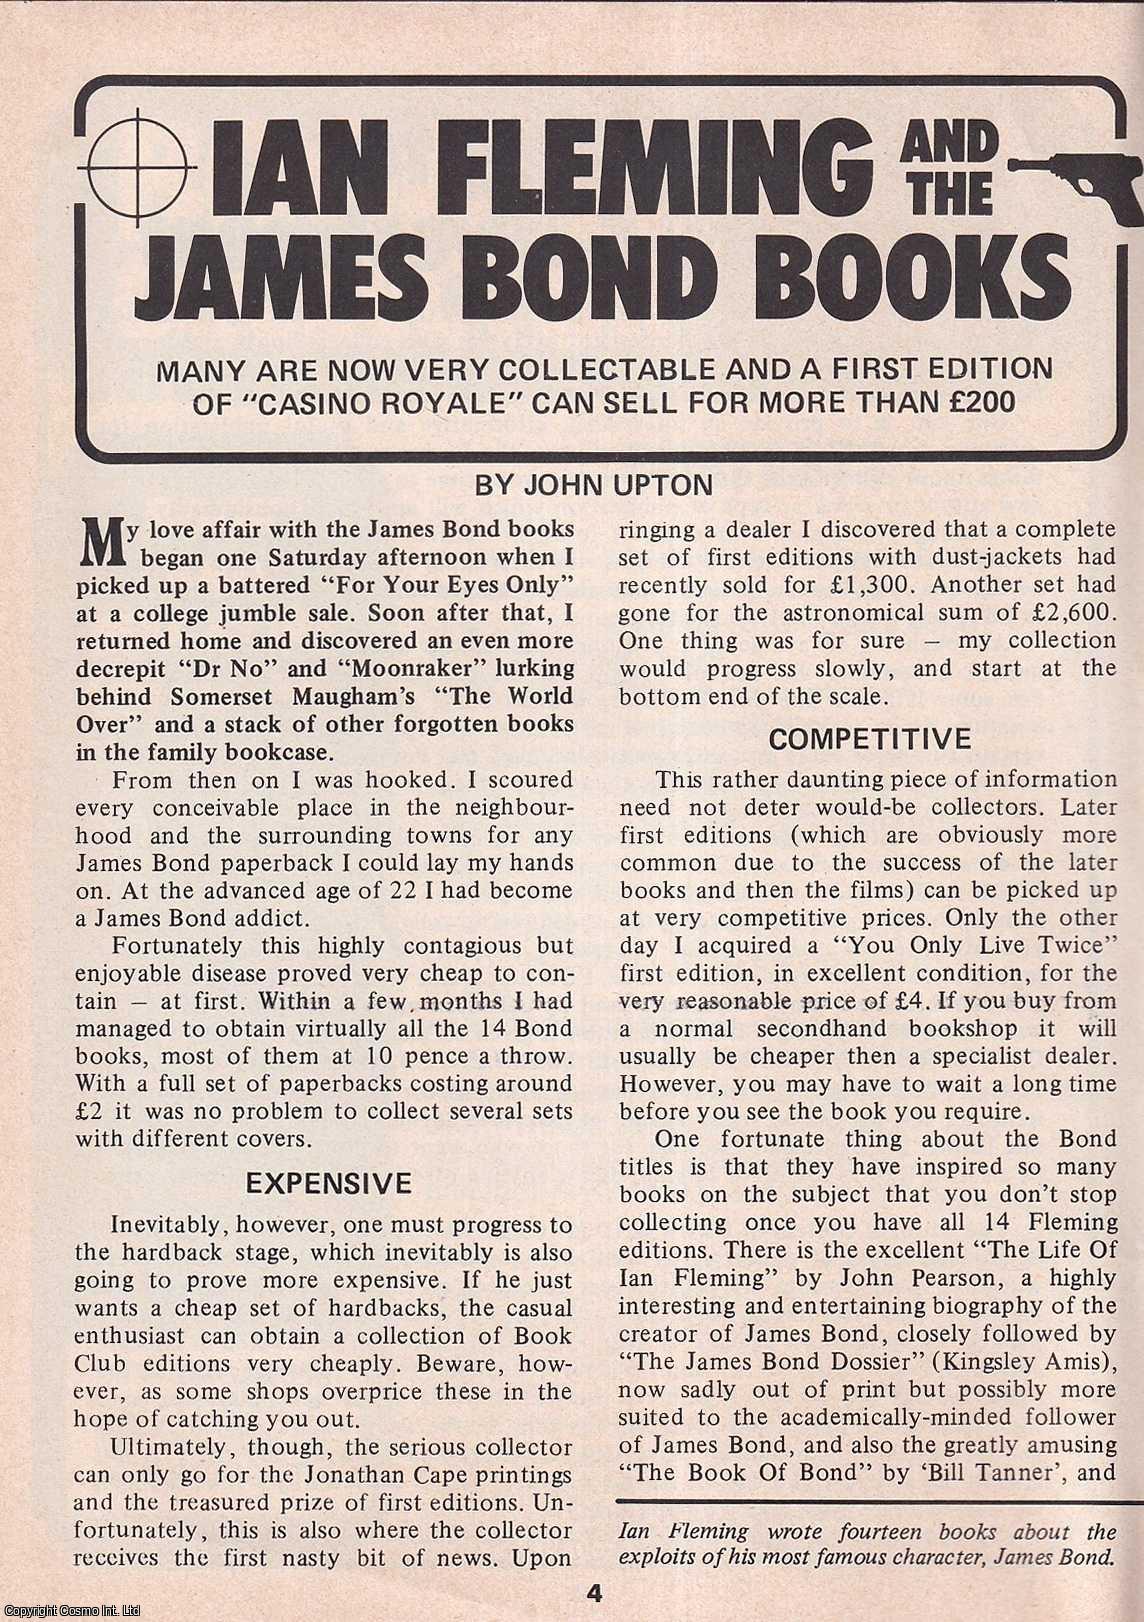 John Upton - Ian Fleming and The James Bond Books. This is an original article separated from an issue of The Book & Magazine Collector publication.